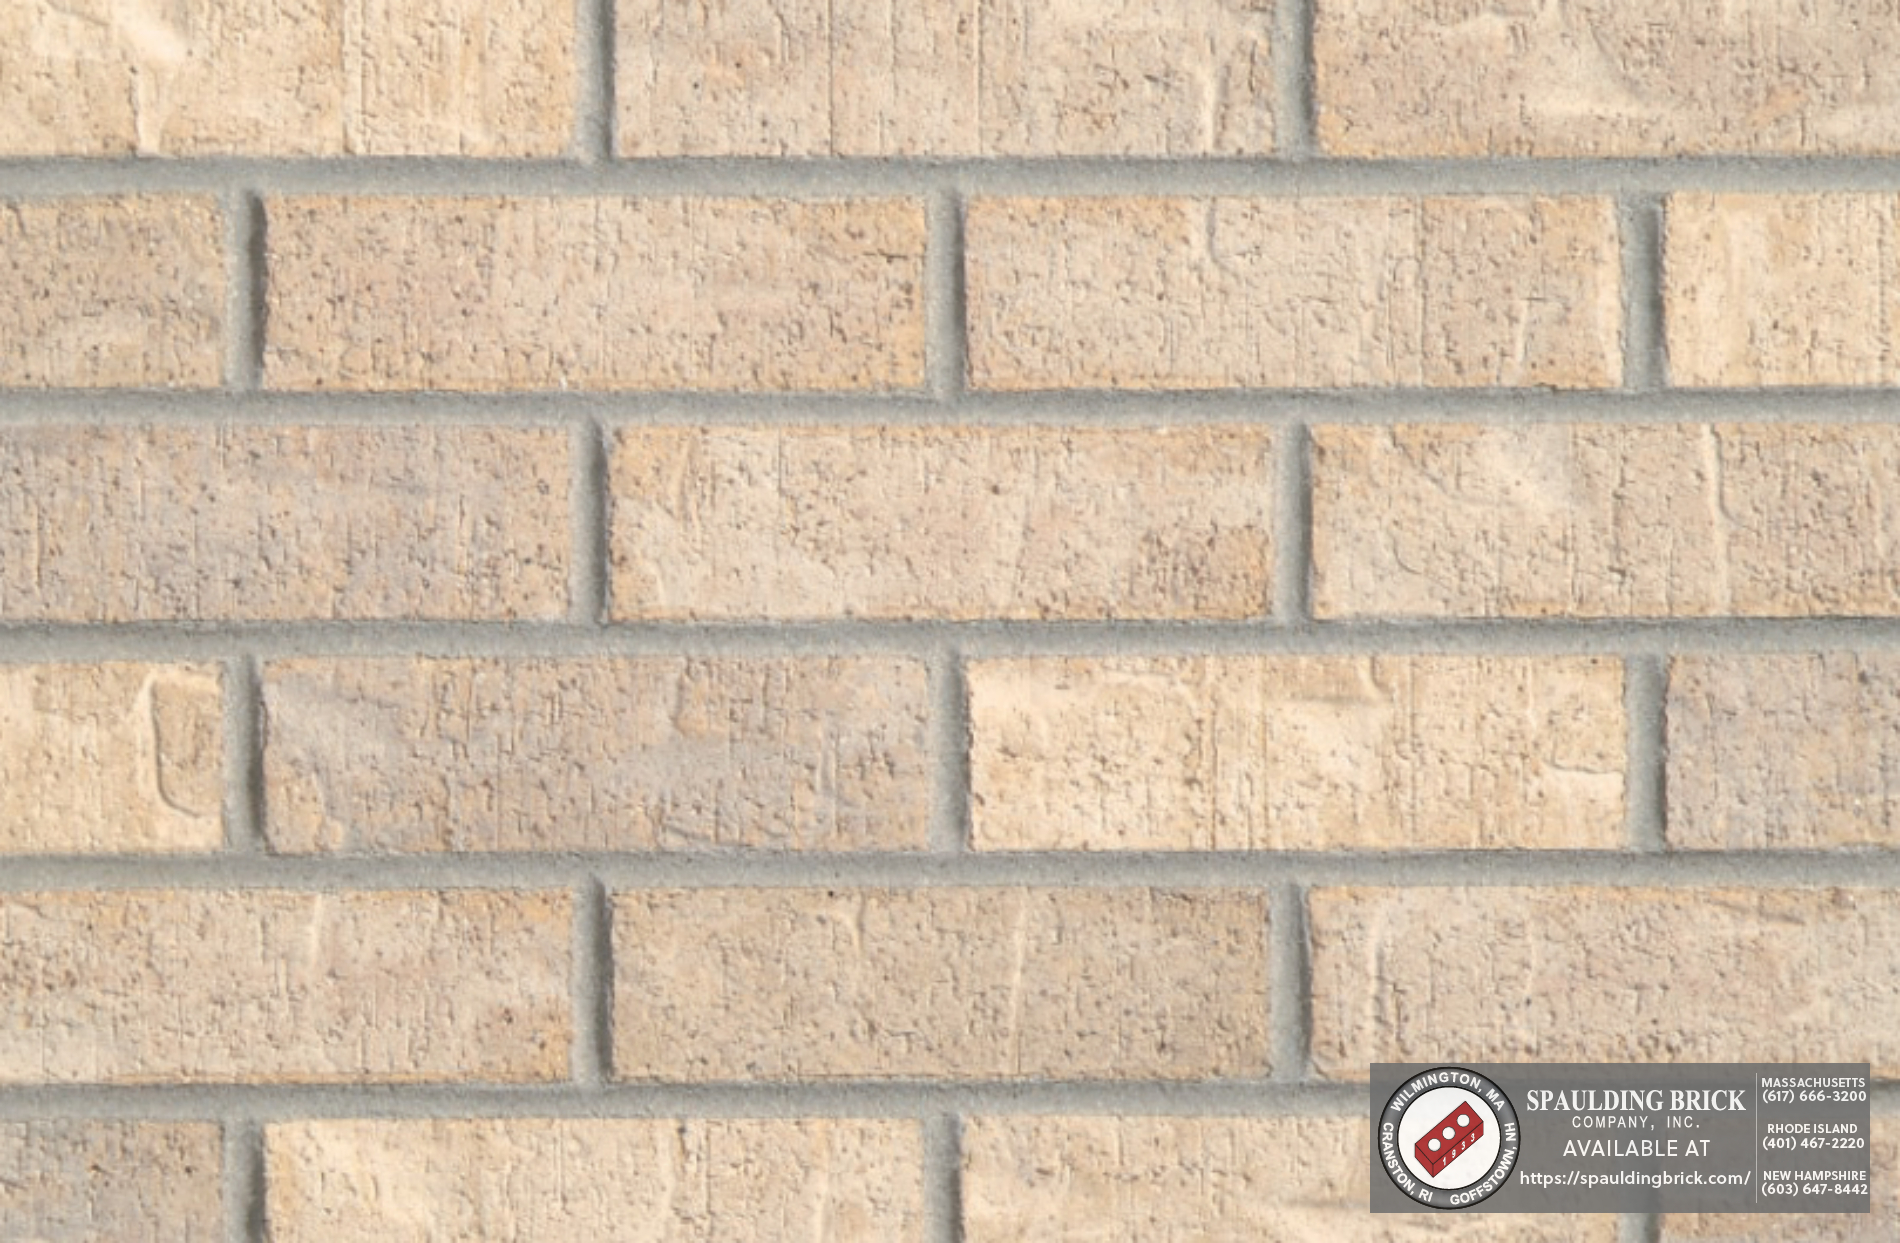 all stone brick variants changed textures · Issue #4362 · Creators